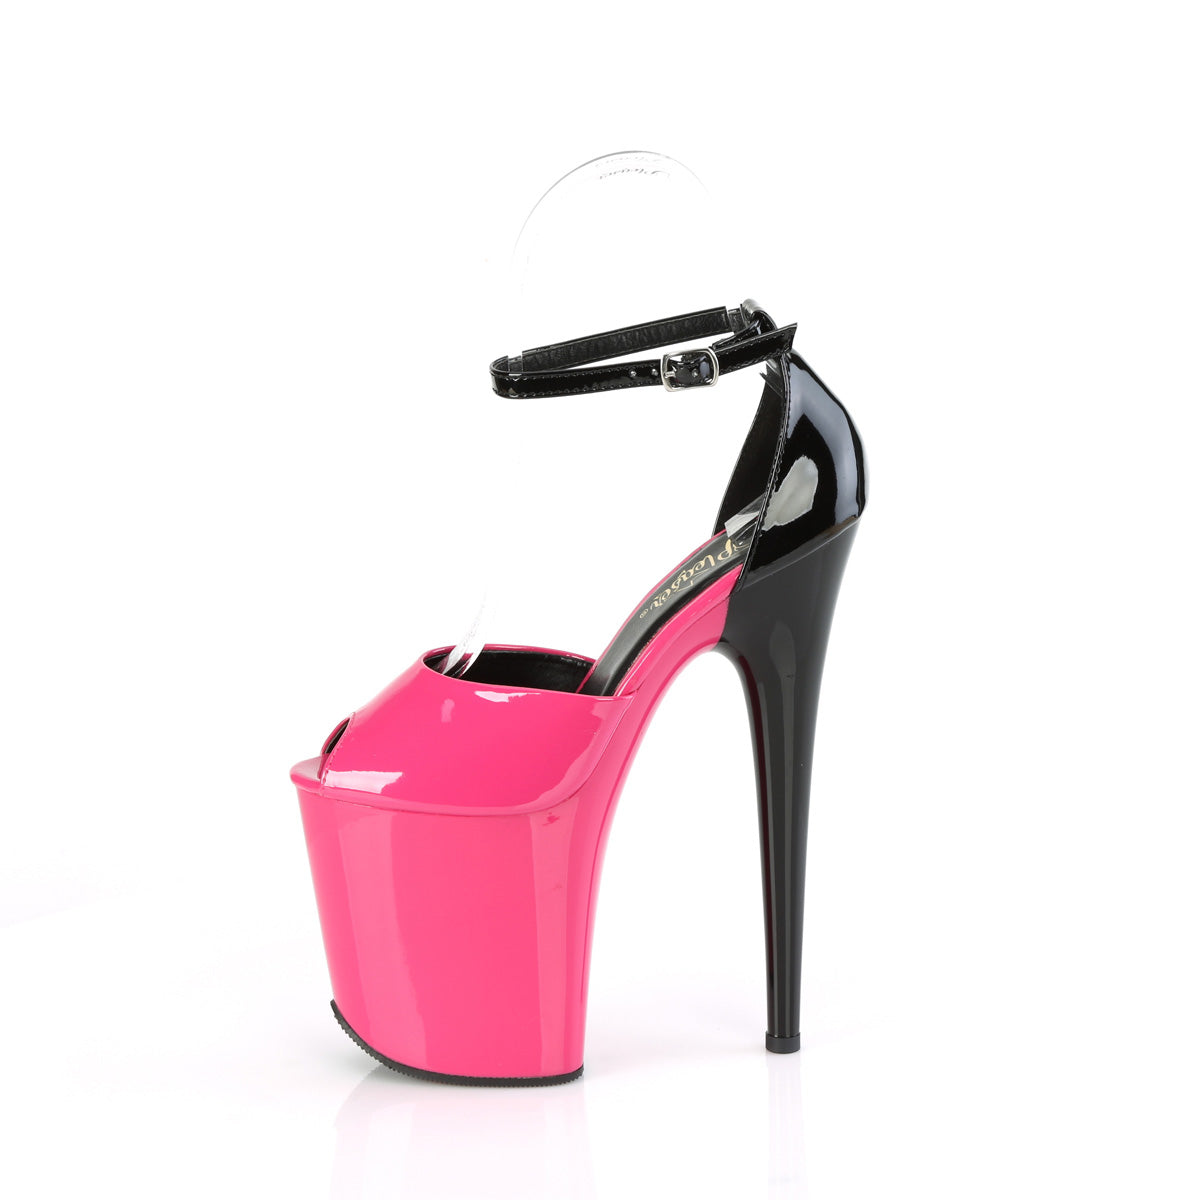 FLAMINGO-868 Pleaser Sexy 8 Inch Pole Dancing Ankle Strap Shoes